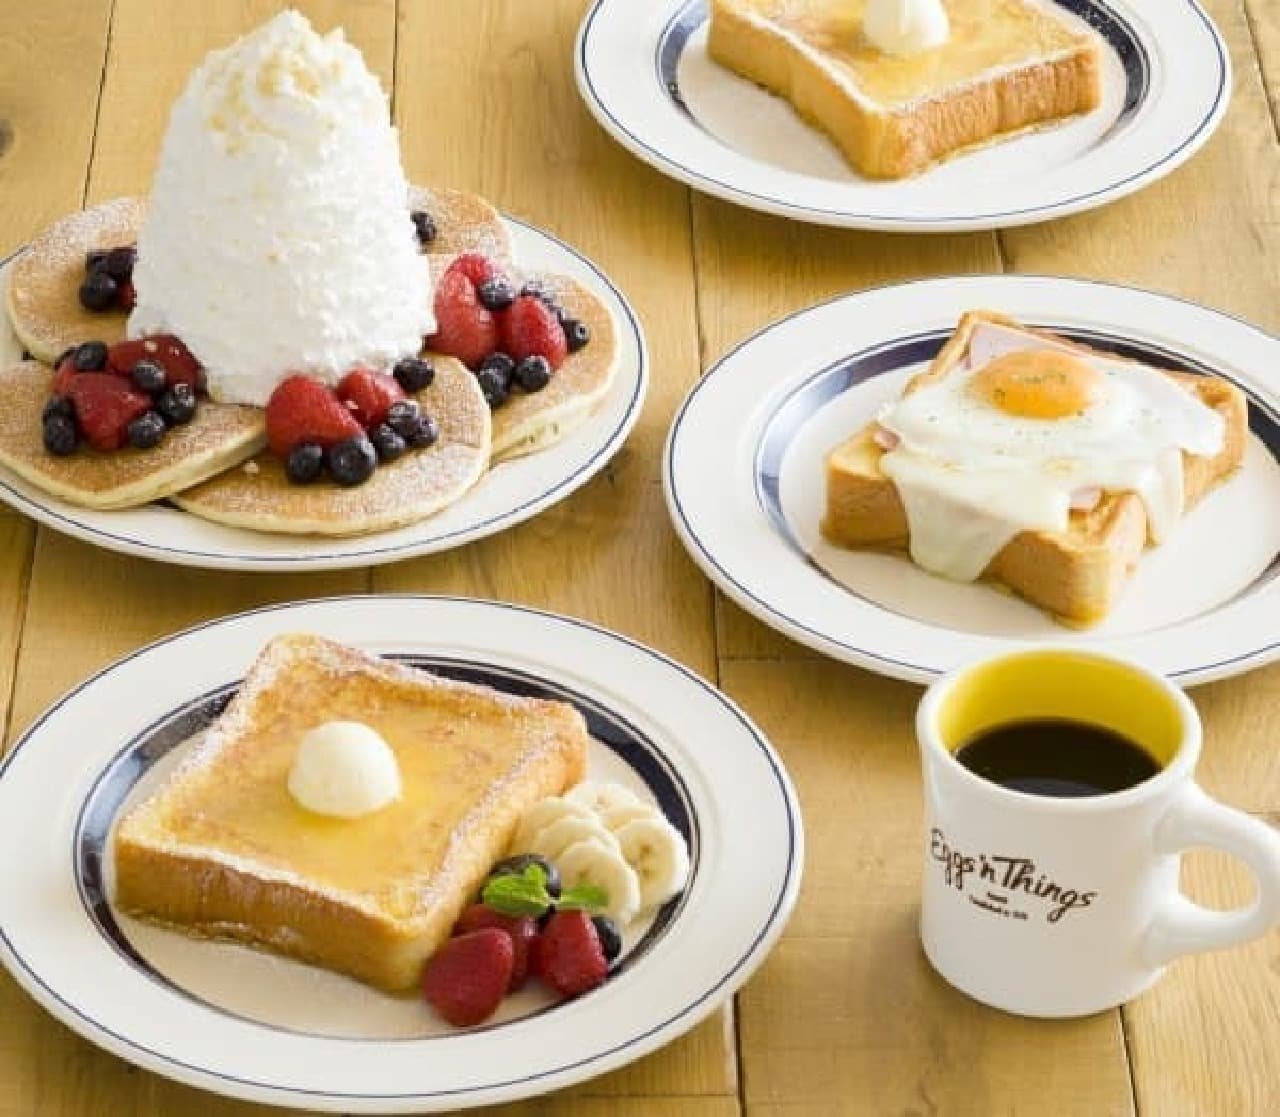 Eggs'n Things introduces a total of 27 new menu items to commemorate the 8th anniversary of Japan's landing